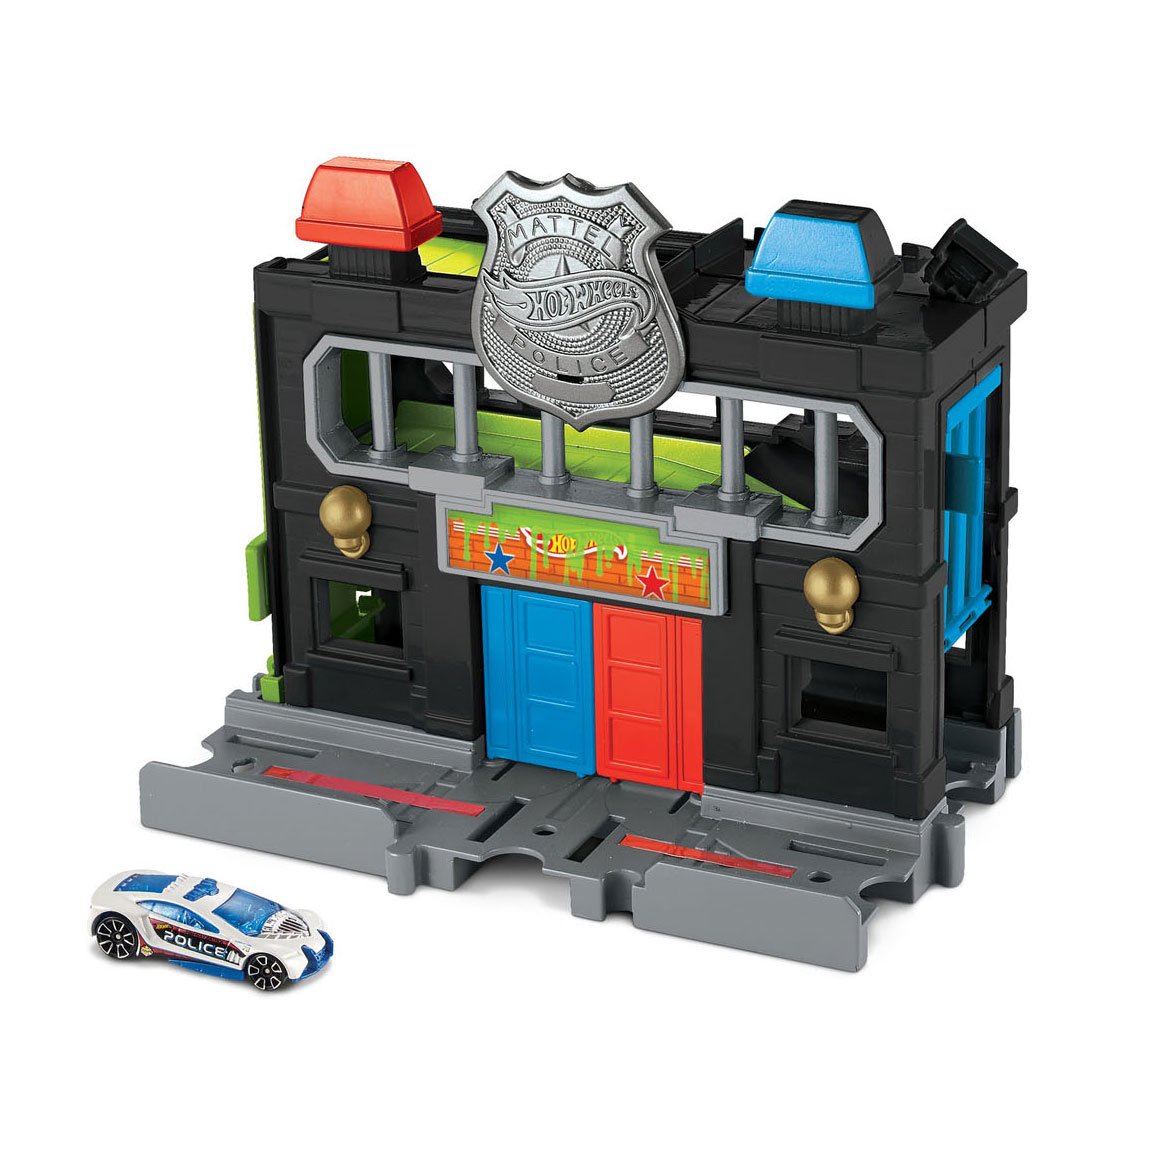 Hot Wheels Downtown Police Station Spielset